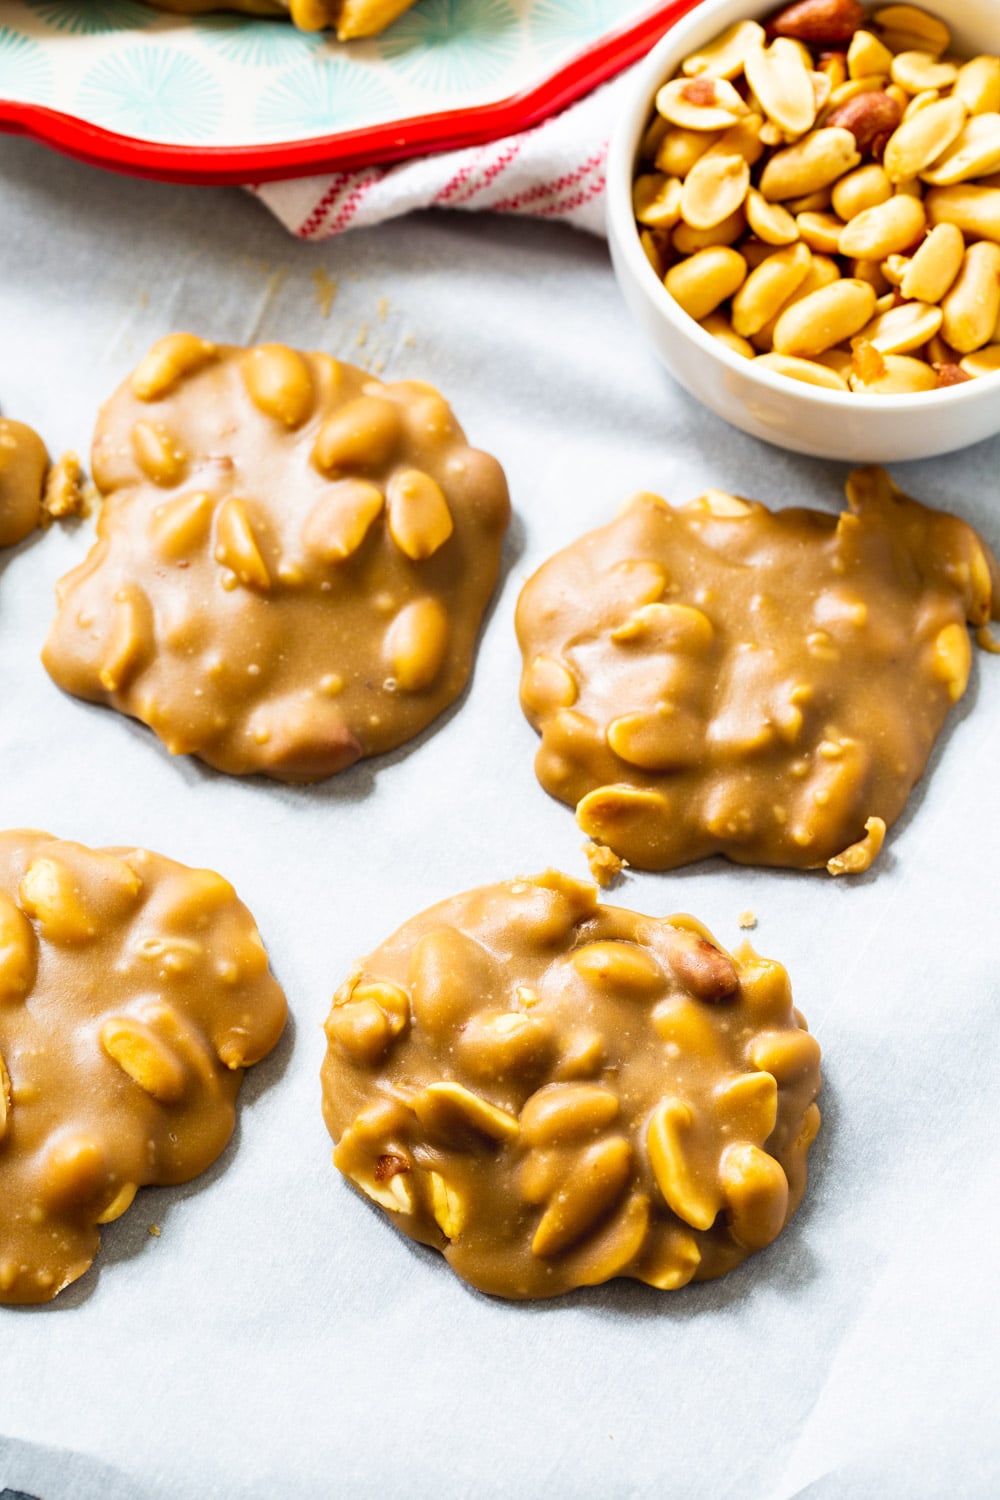 Peanut Pralines on parchment paper with bowl of peanuts.